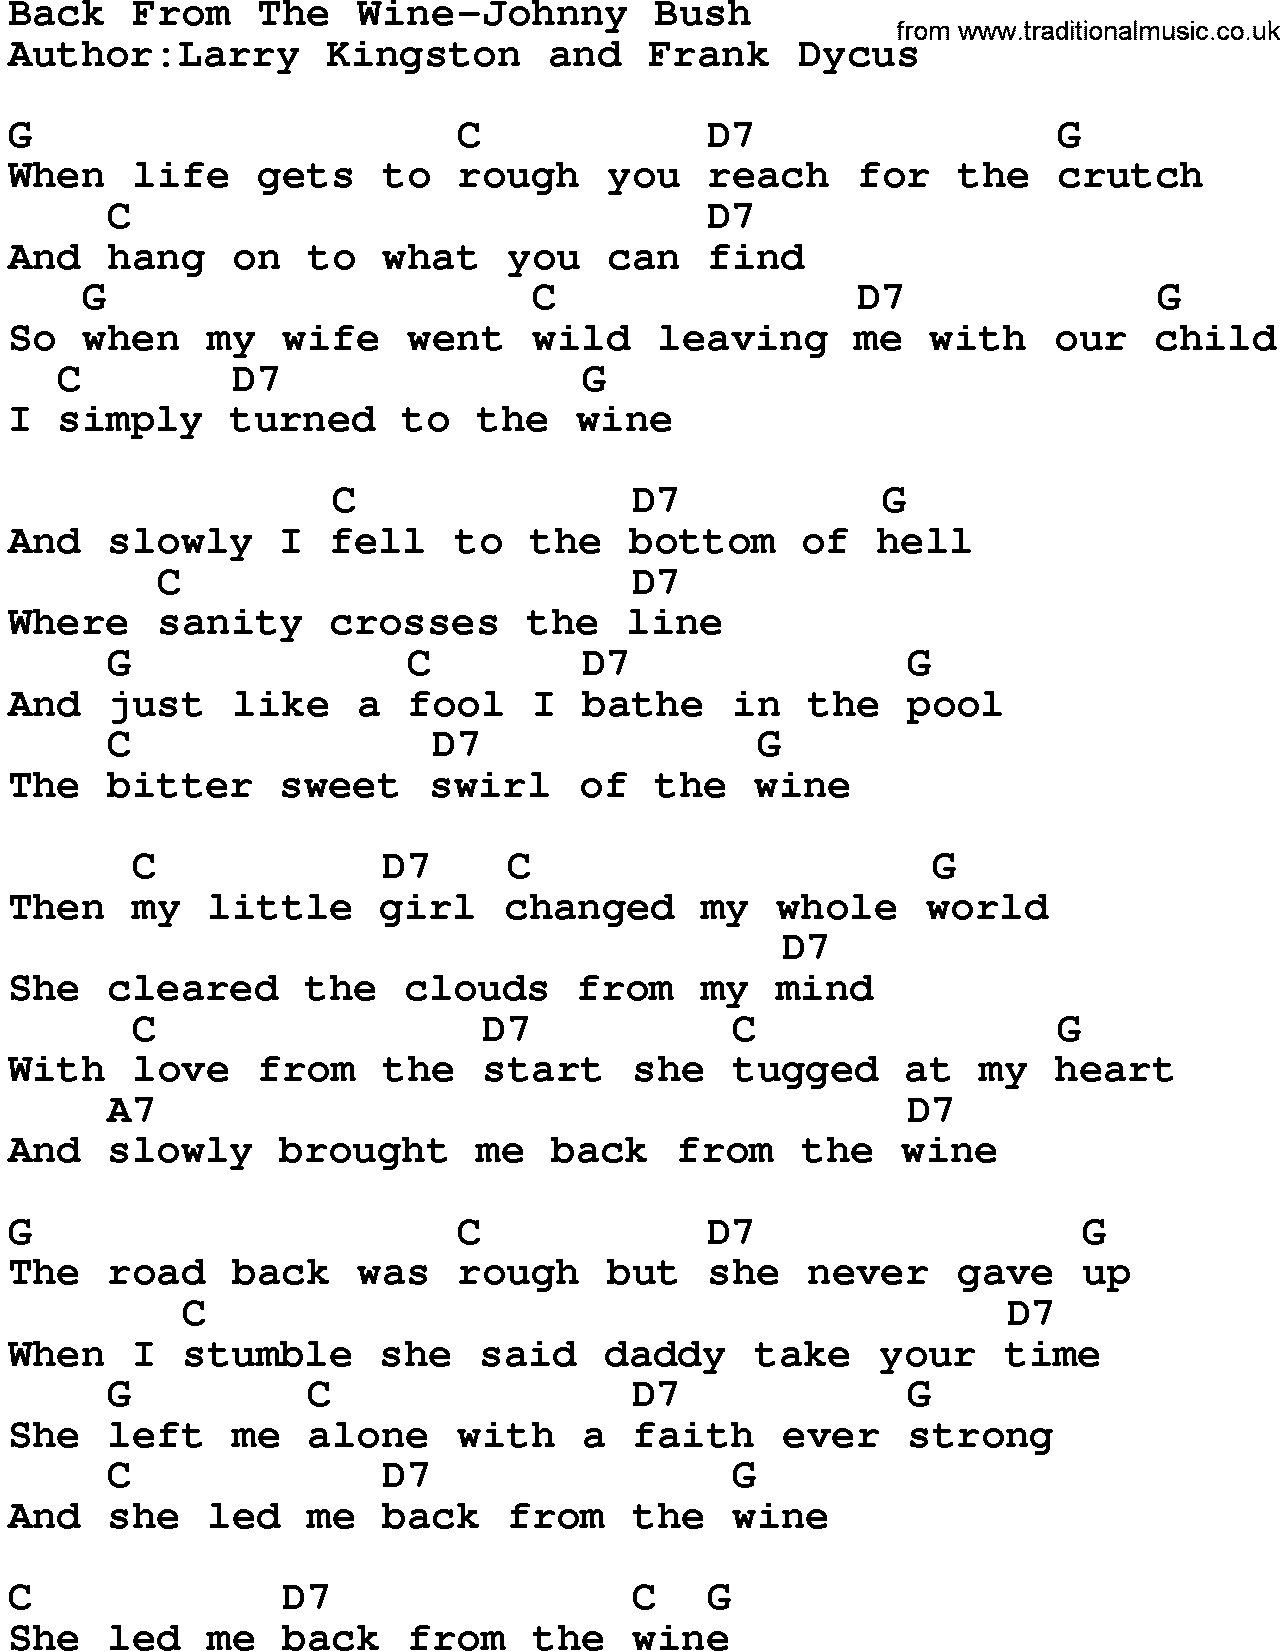 Country music song: Back From The Wine-Johnny Bush lyrics and chords